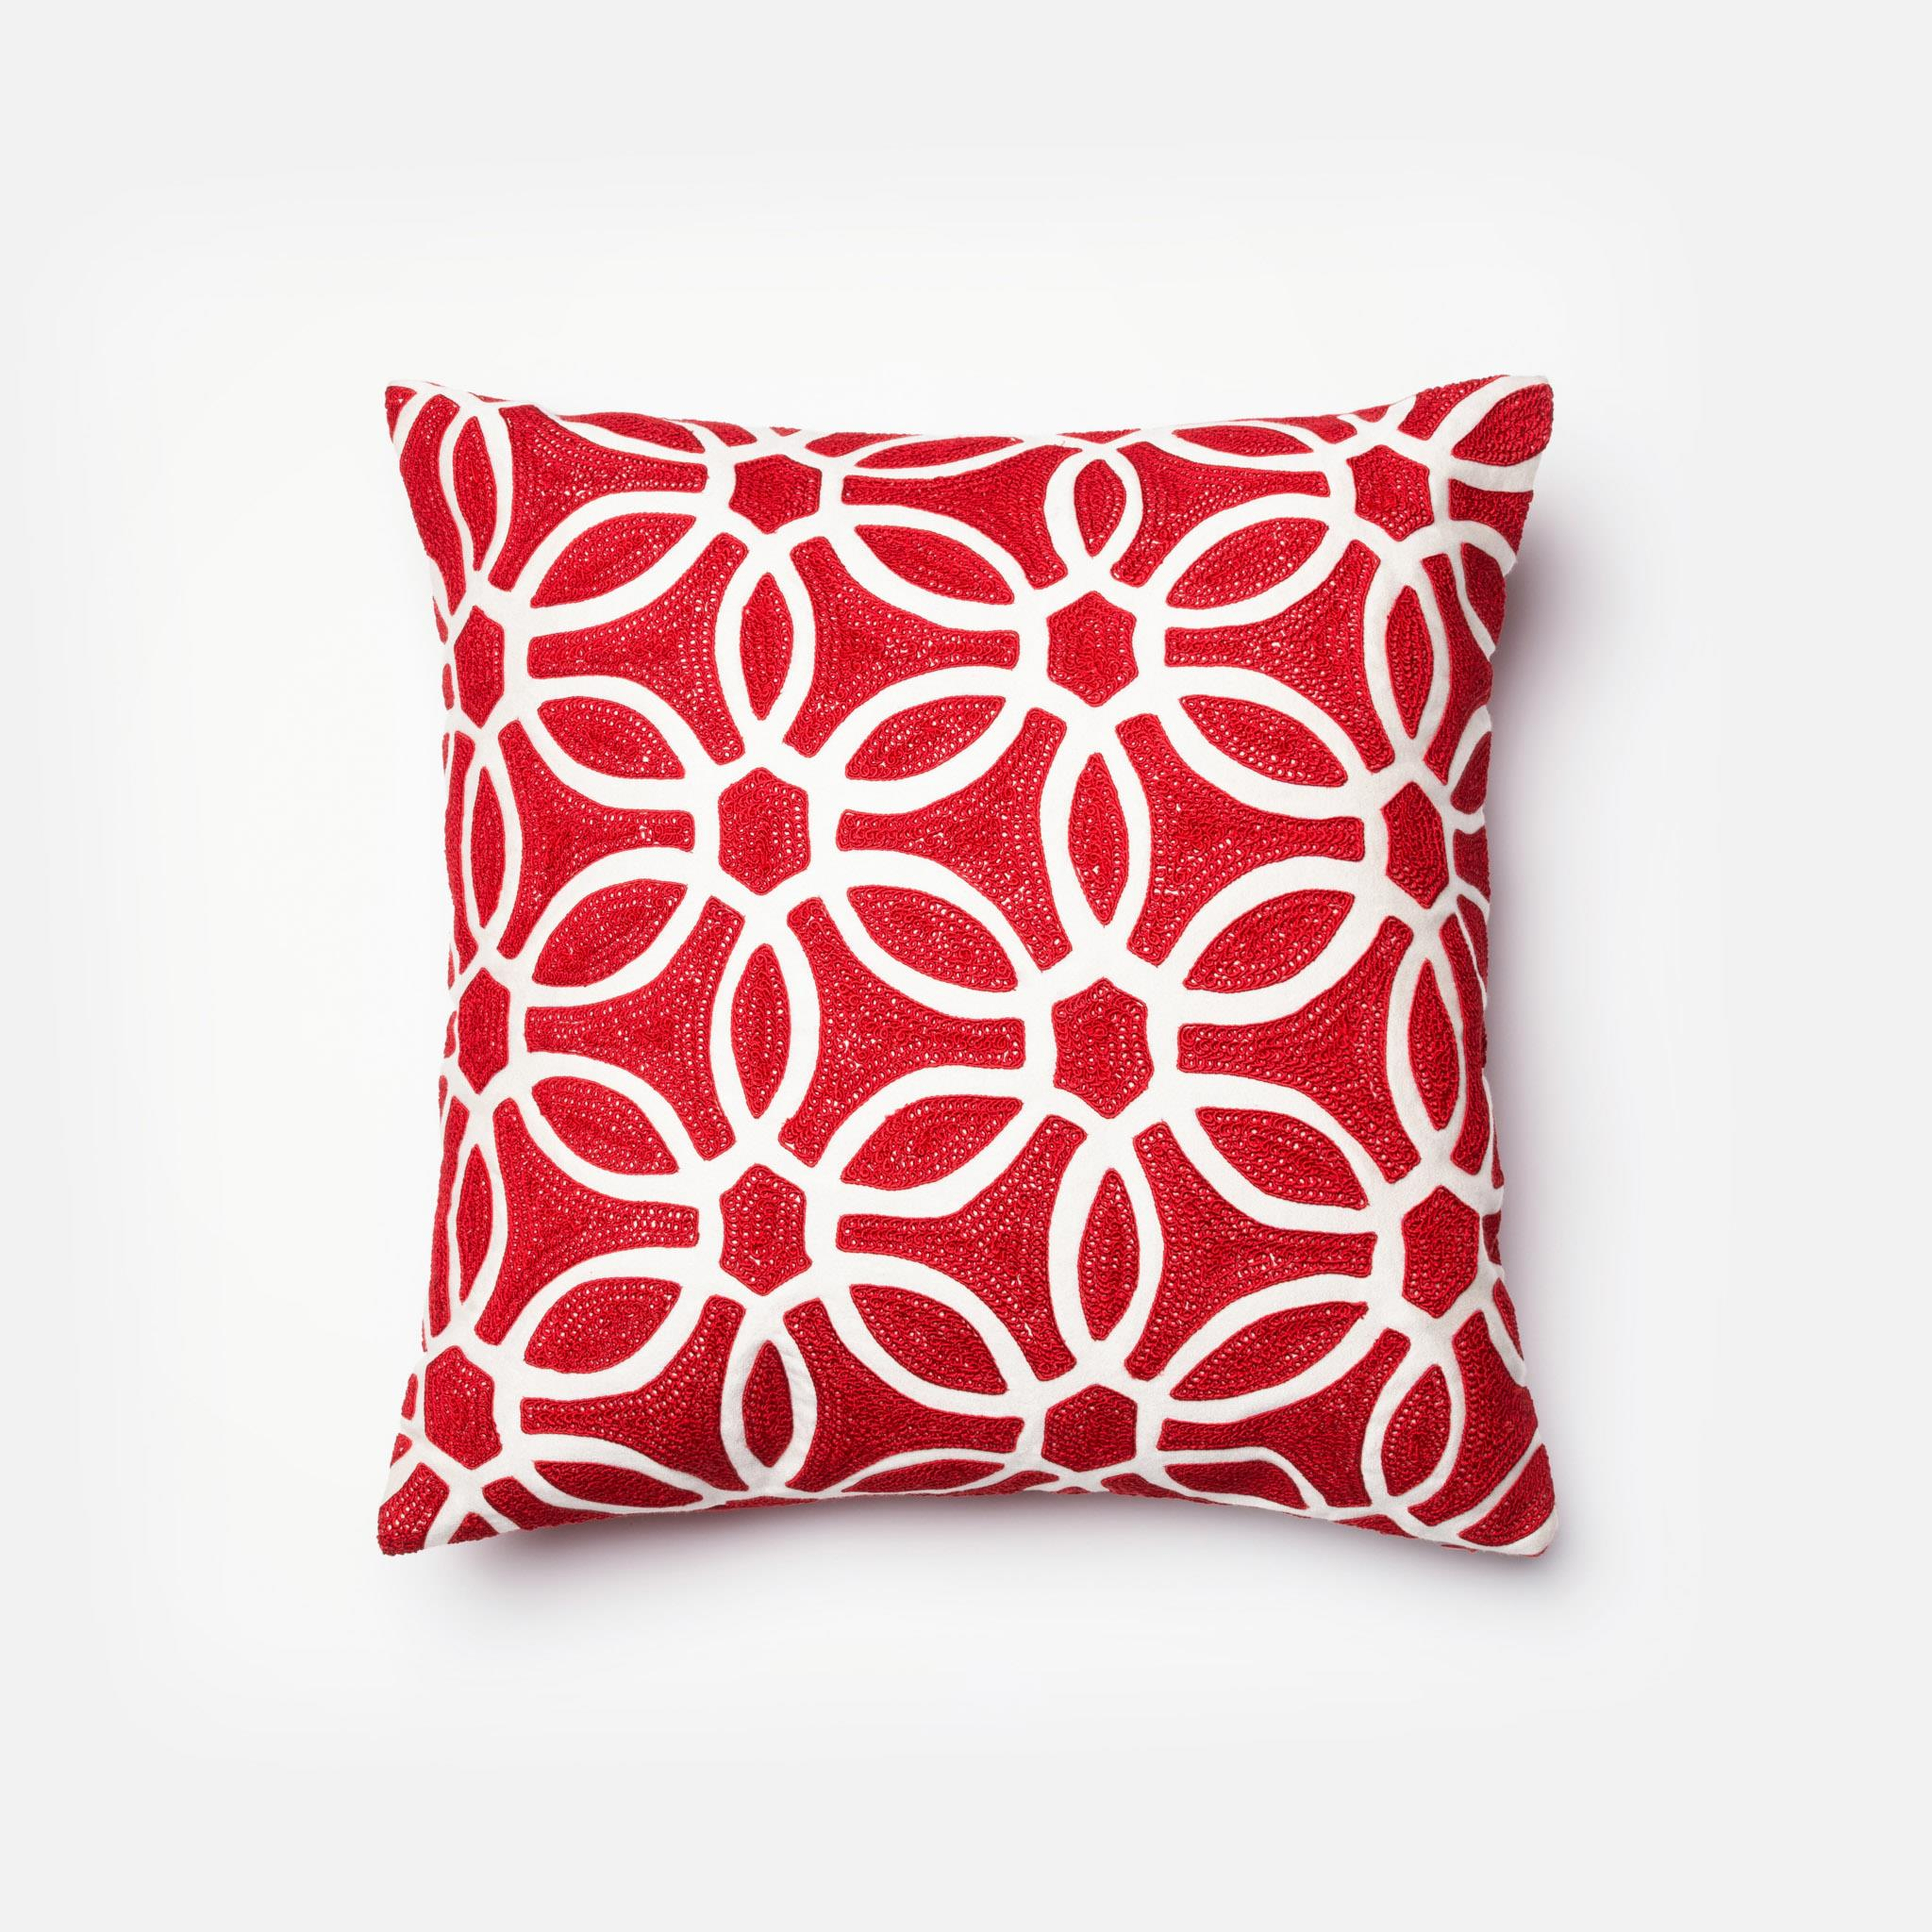 PILLOWS - RED / WHITE - 18" X 18" Cover w/Down - Loloi II